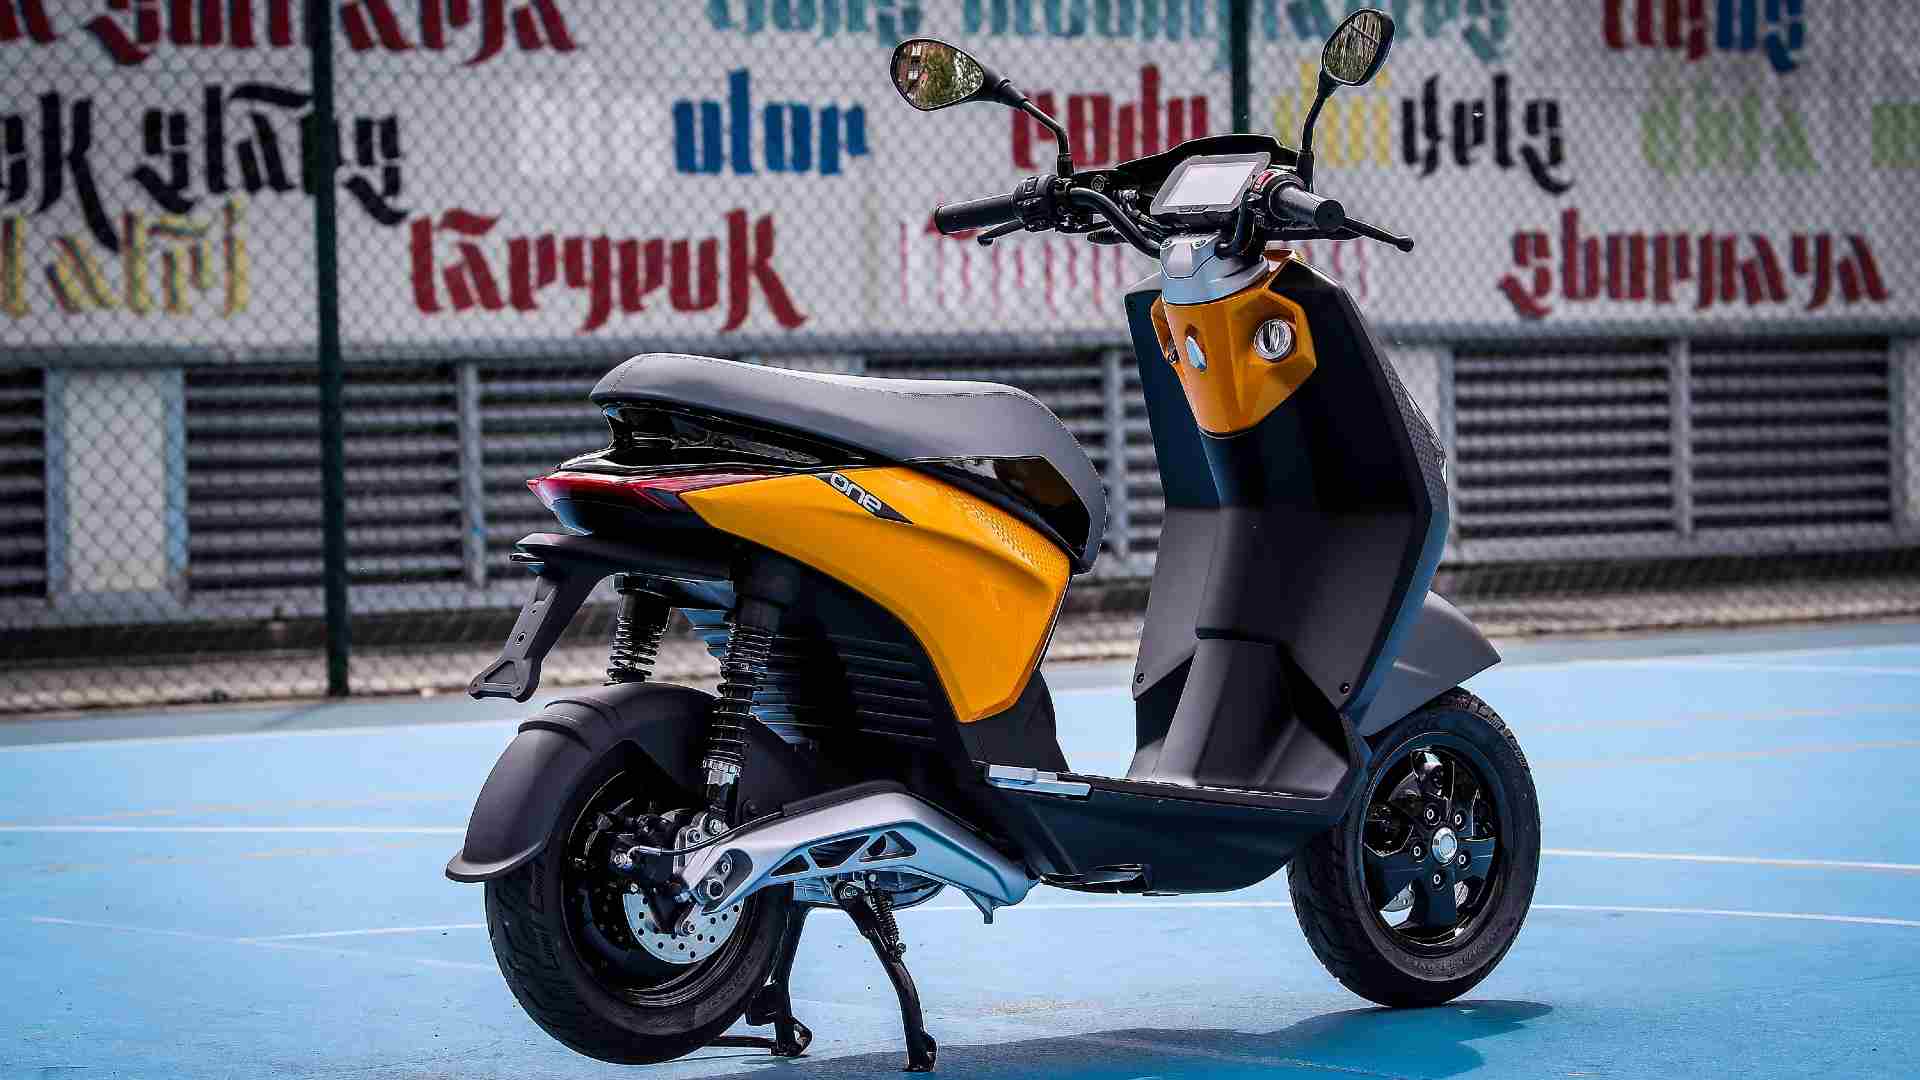 Piaggio will put the One electric scooter on sale in Europe at the end of June. Image: Piaggio